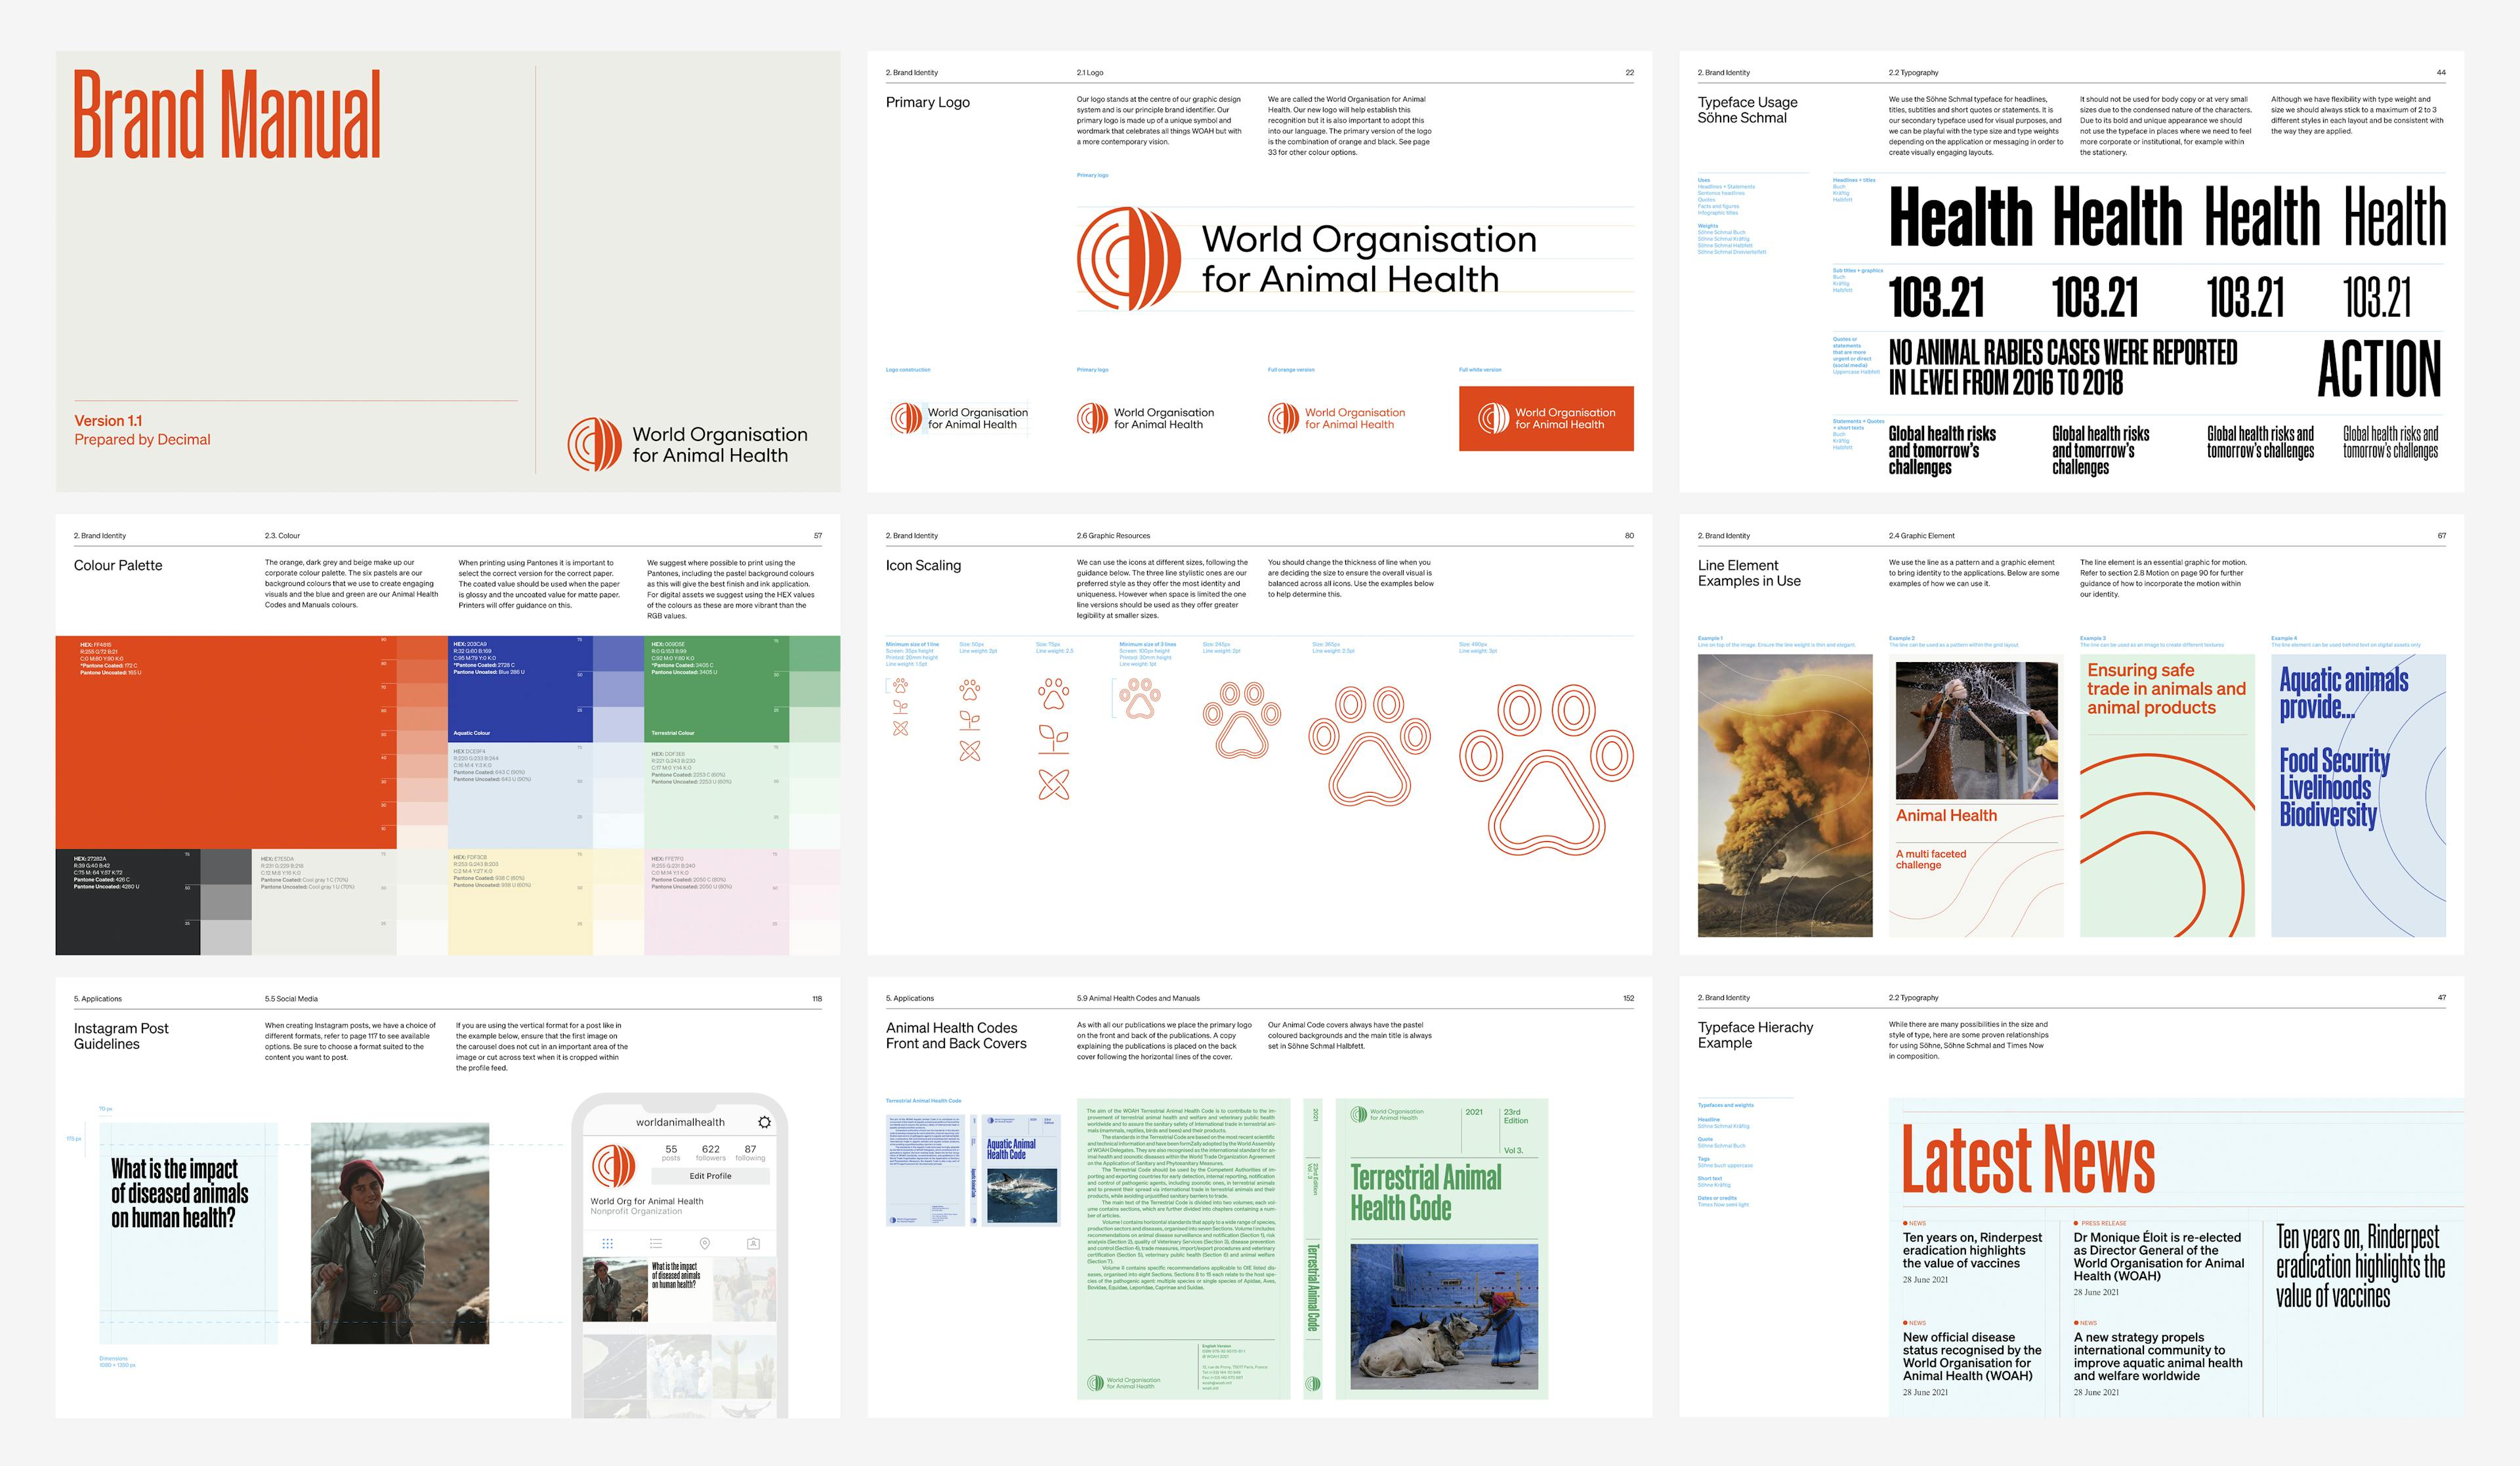 Collage of Brand Manual